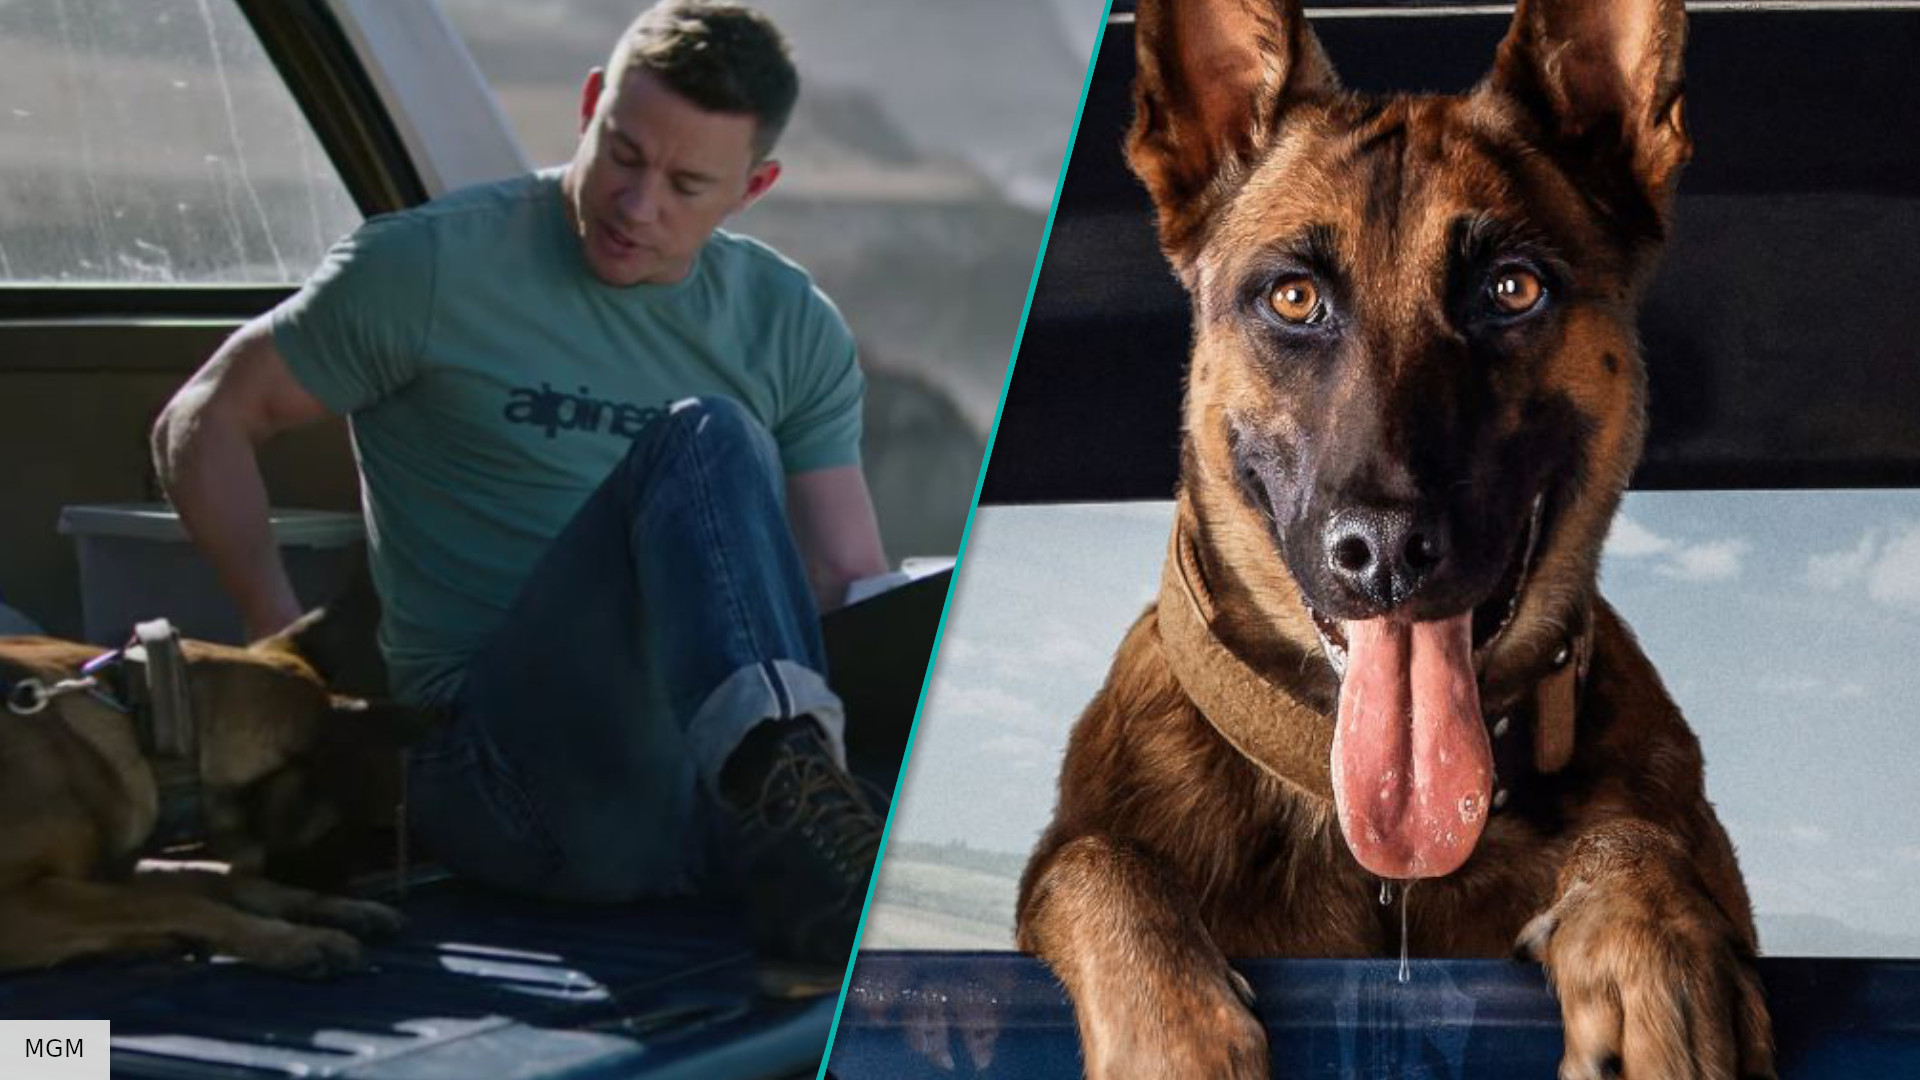 How to watch Dog – can I stream Channing Tatum’s new movie? | The Digital Fix